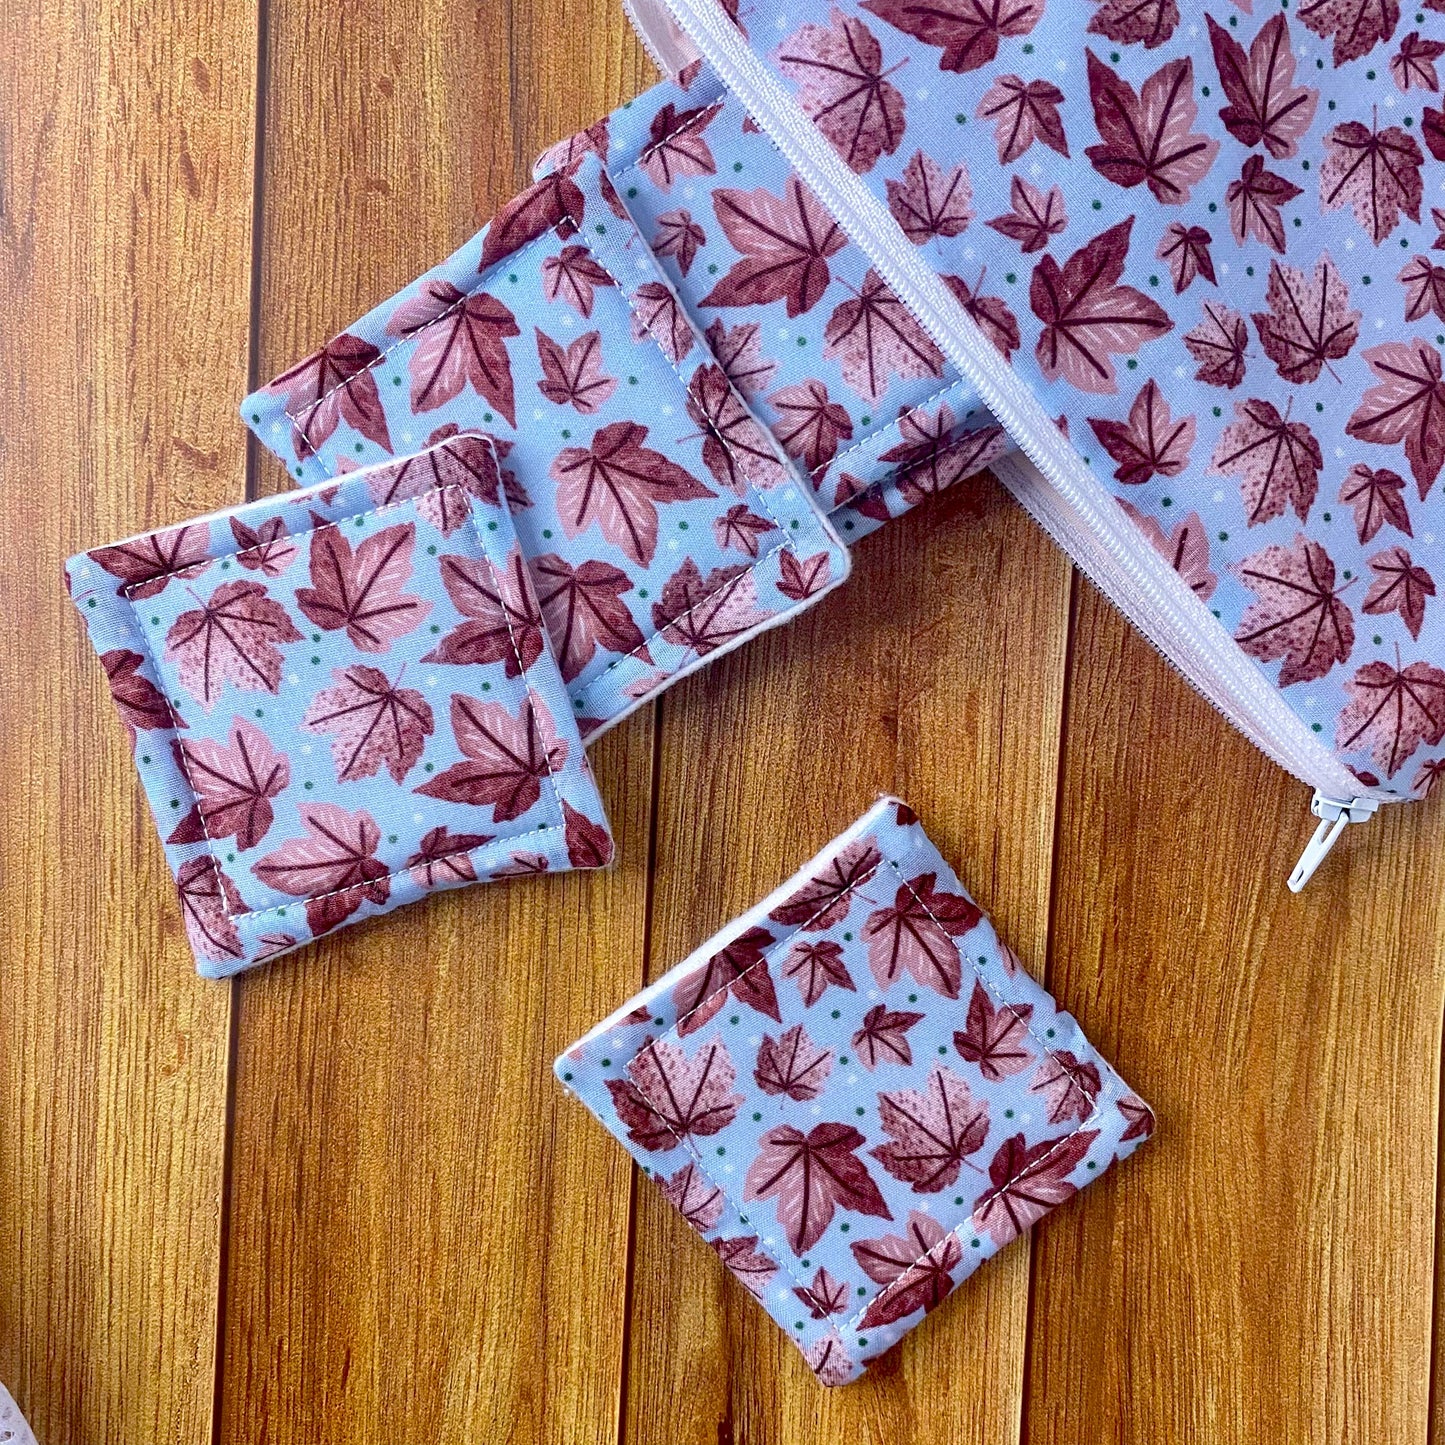 reusable skincare pads spilling out of a pouch with the pink leafy pattern design on them